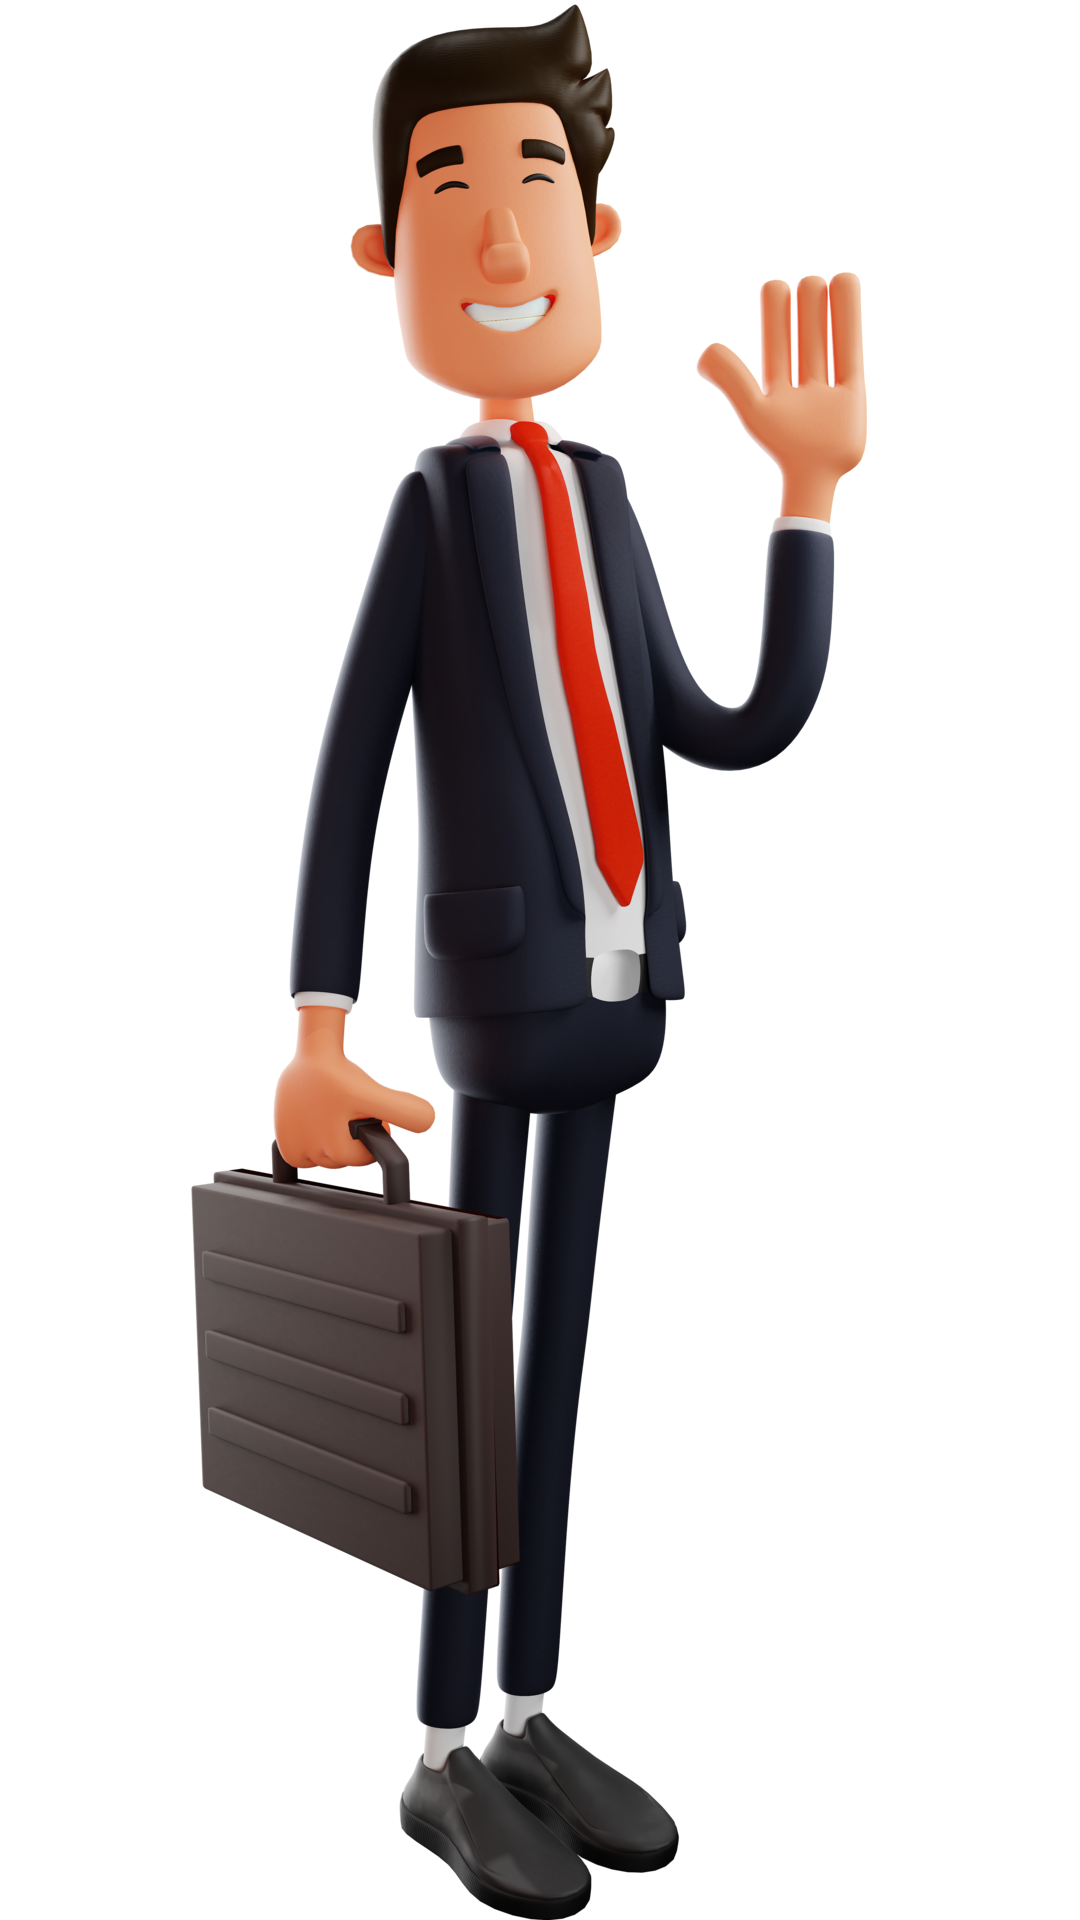 Free 3D illustrations. Handsome Office Worker Cartoon 3D Character very  neat and smiling happily. He is ready to go to the office. He was carrying  a suitcase and waving his hand. 3D